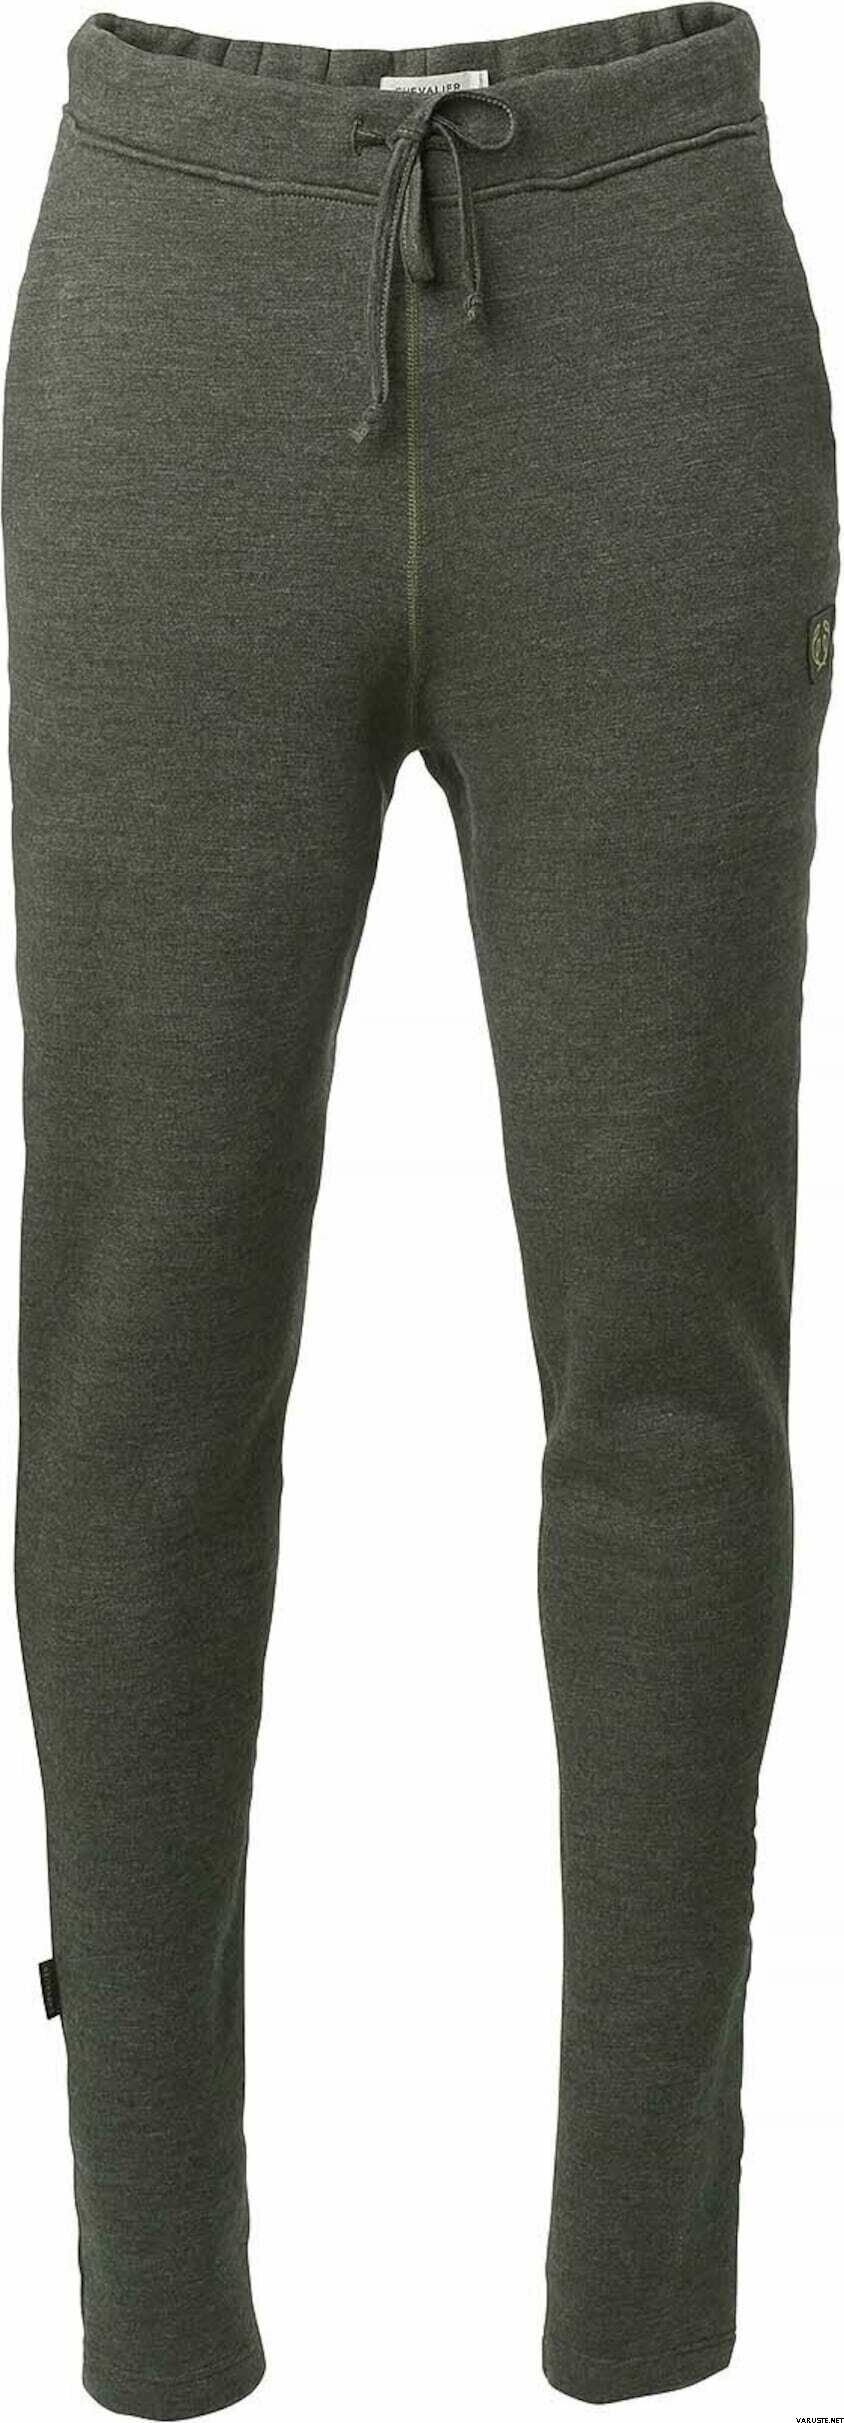 Grizzly Wool Sweatpants Men - Chevalier